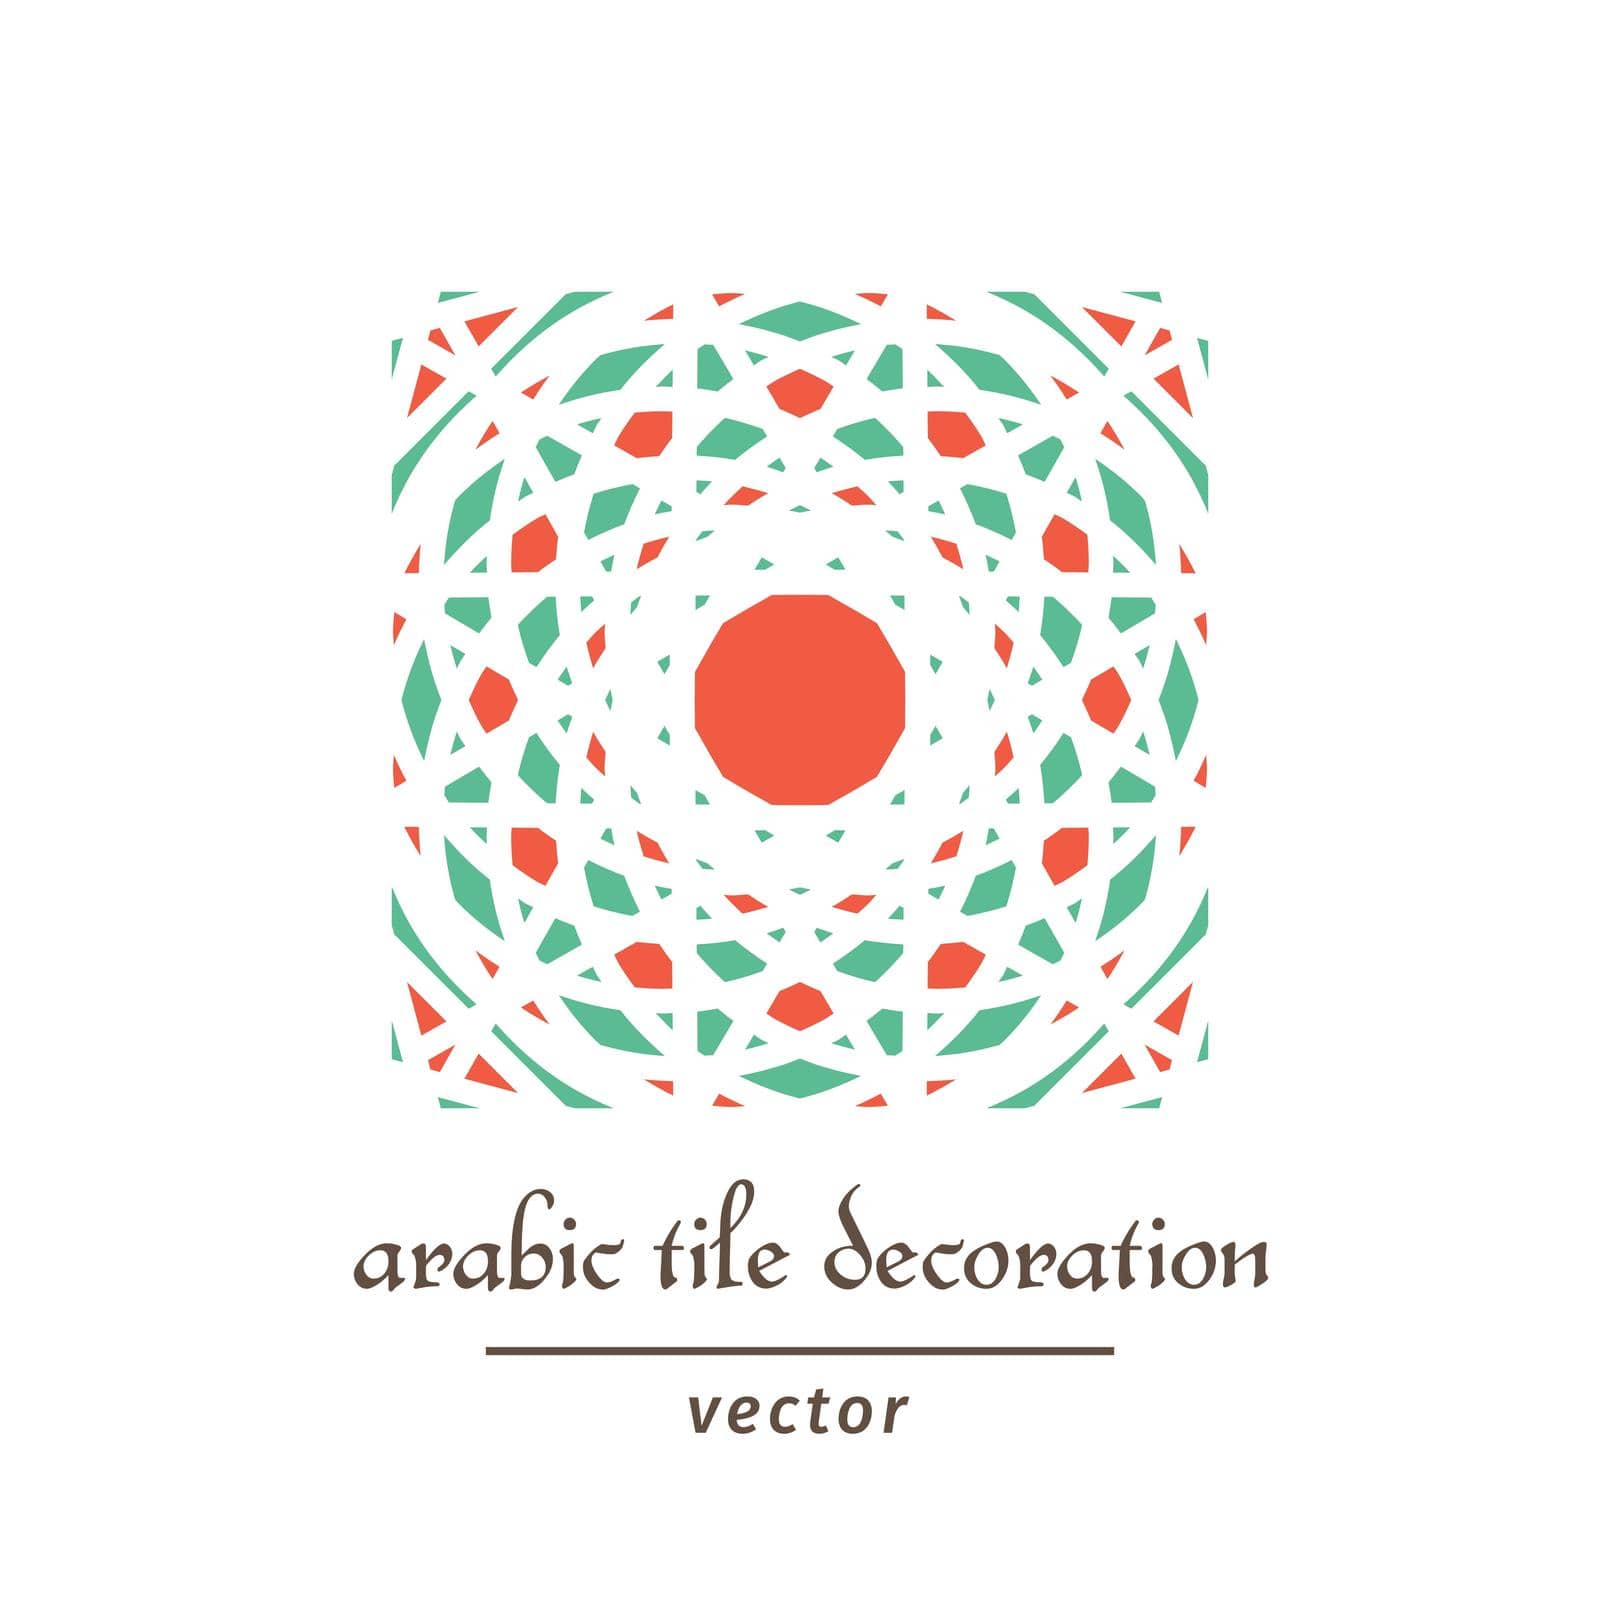 Seamless pattern swatch with arabic geometric ornament. Vector mosaic tile design